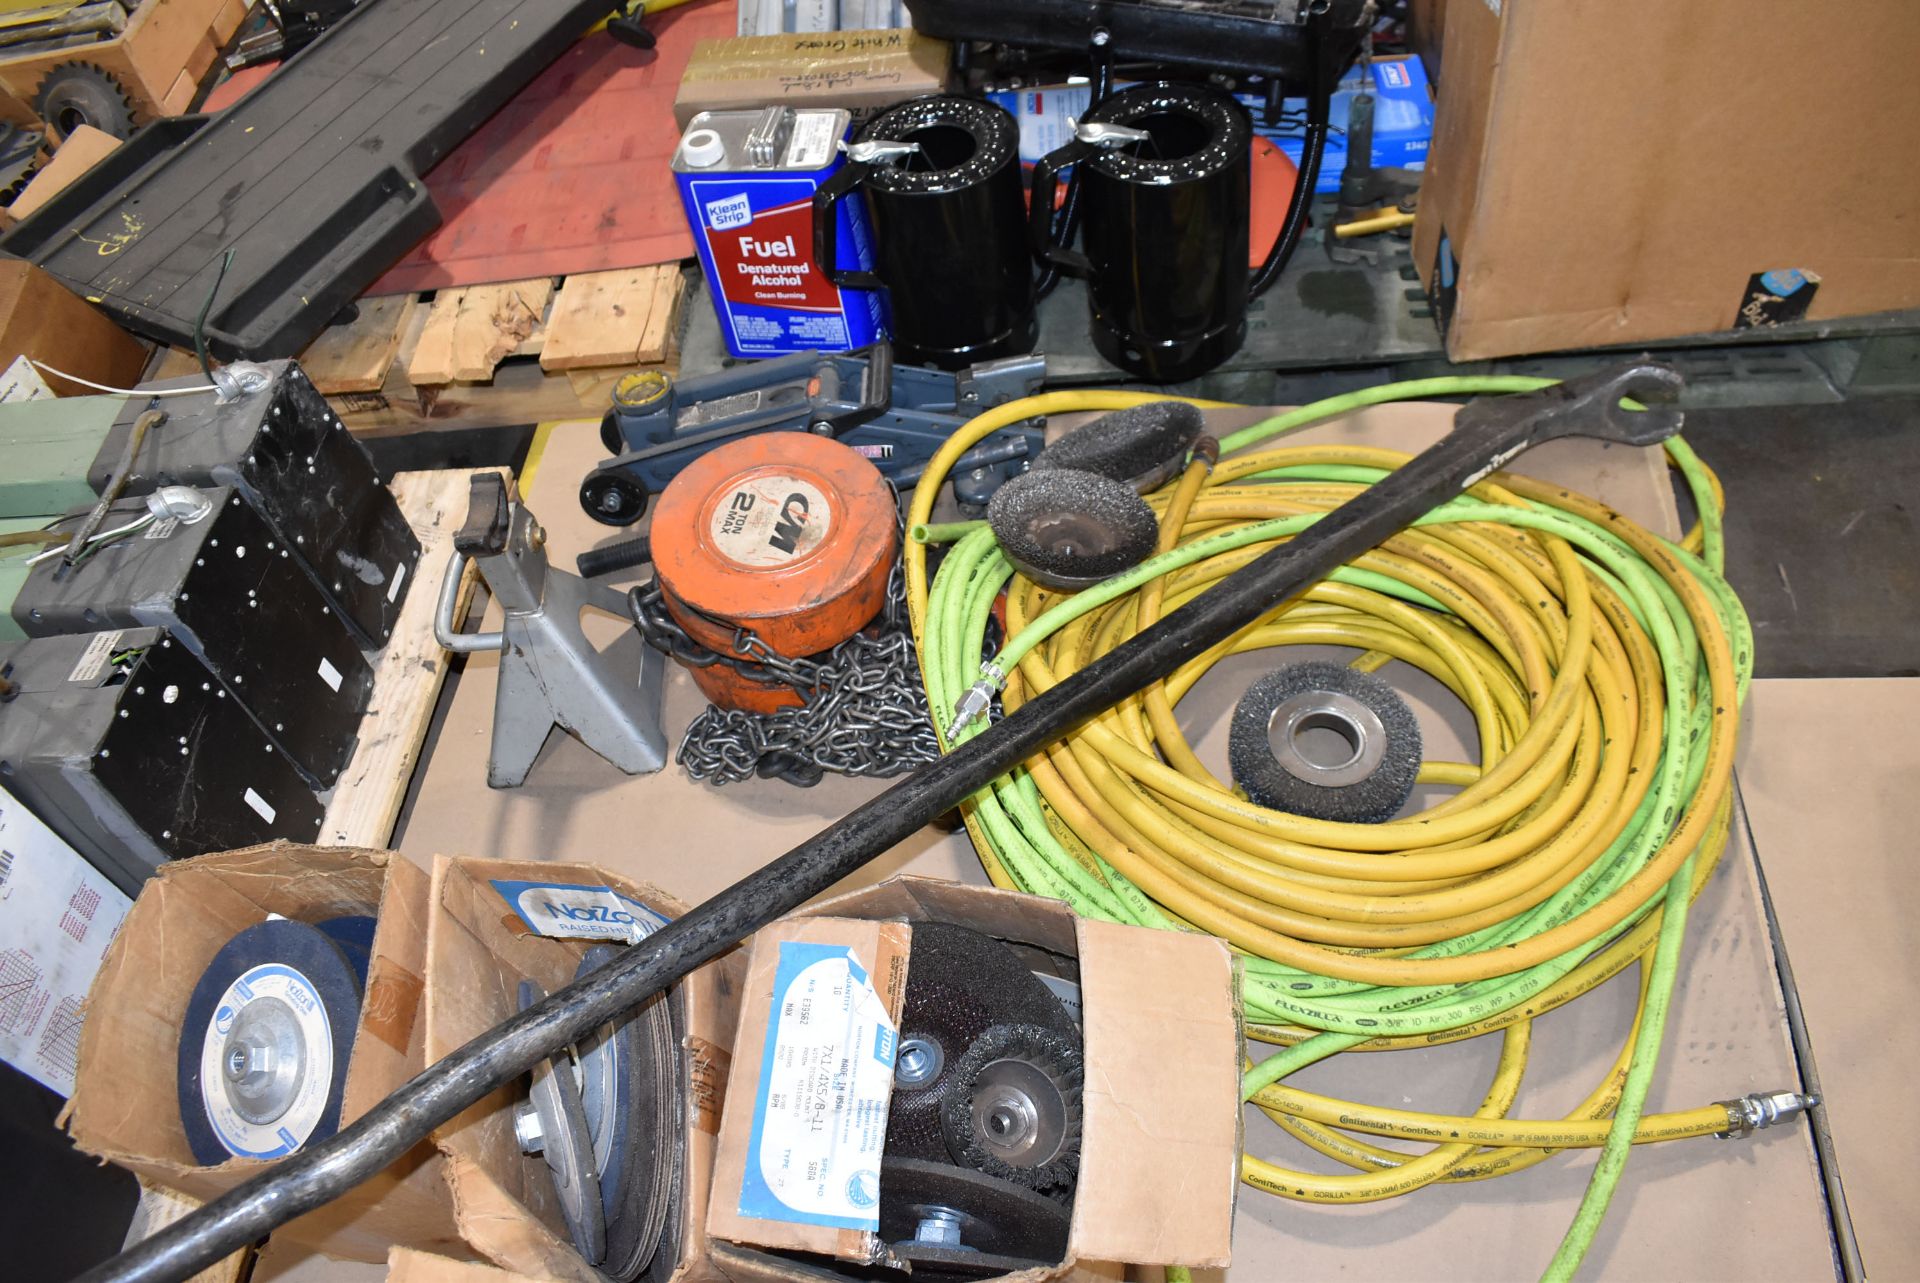 LOT/ CONTENTS OF PALLET WELDING ELECTRODES, PNEUMATIC HOSE, CHAIN FALL AND GRINDING WHEELS - Image 4 of 4